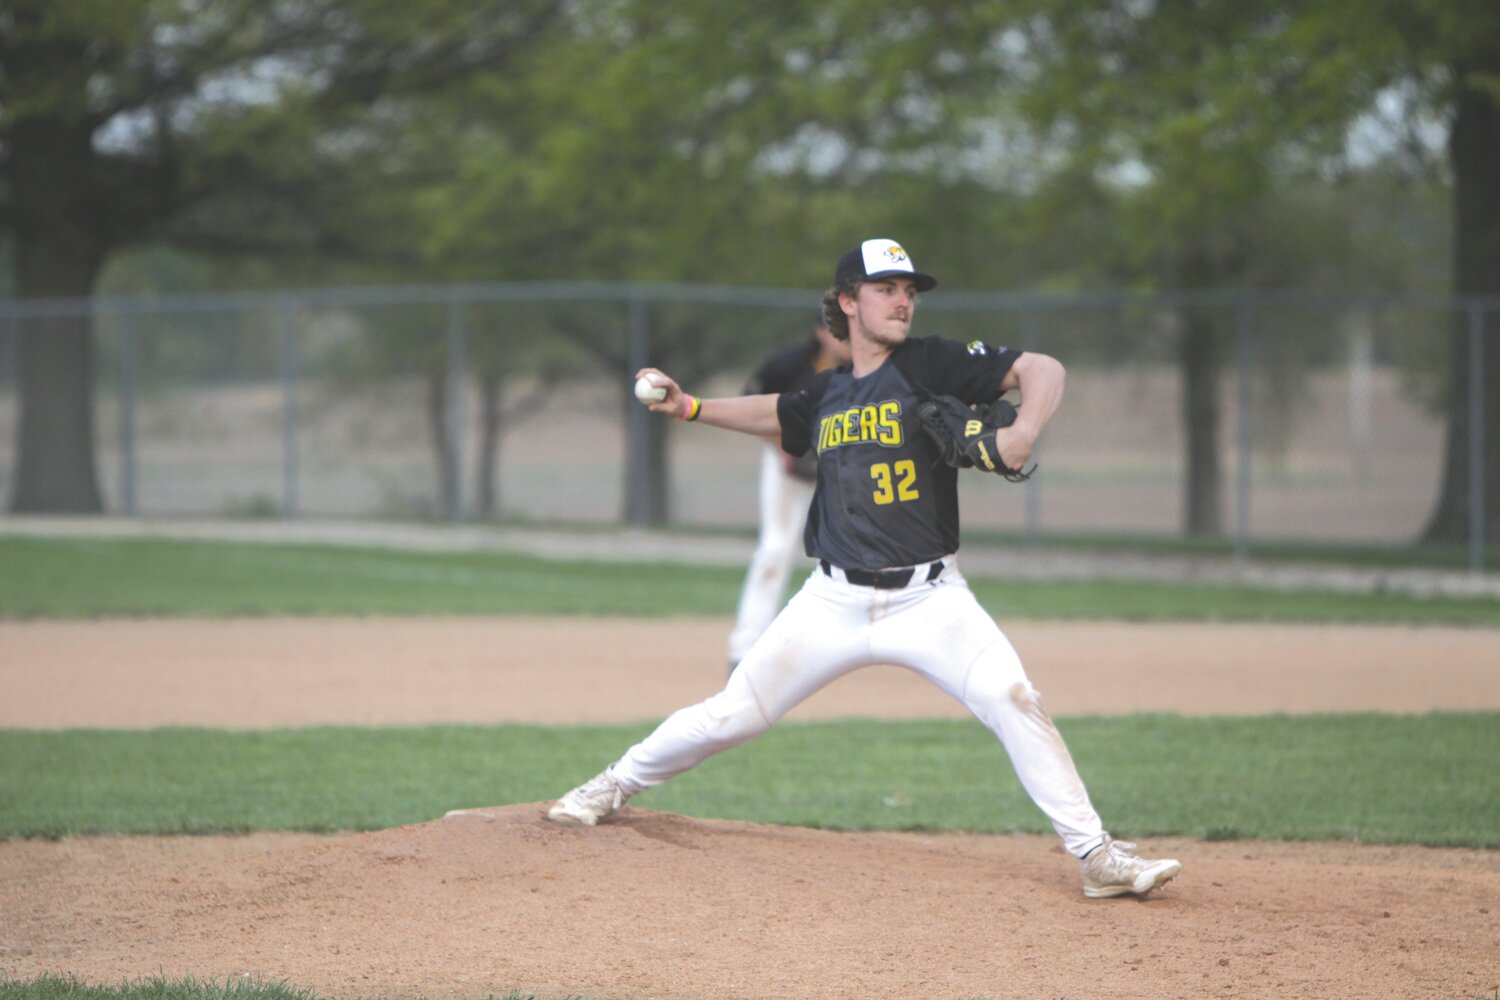 Wellsville-Middletown senior Lucas Moore delivers a pitch against Montgomery County on April 25.